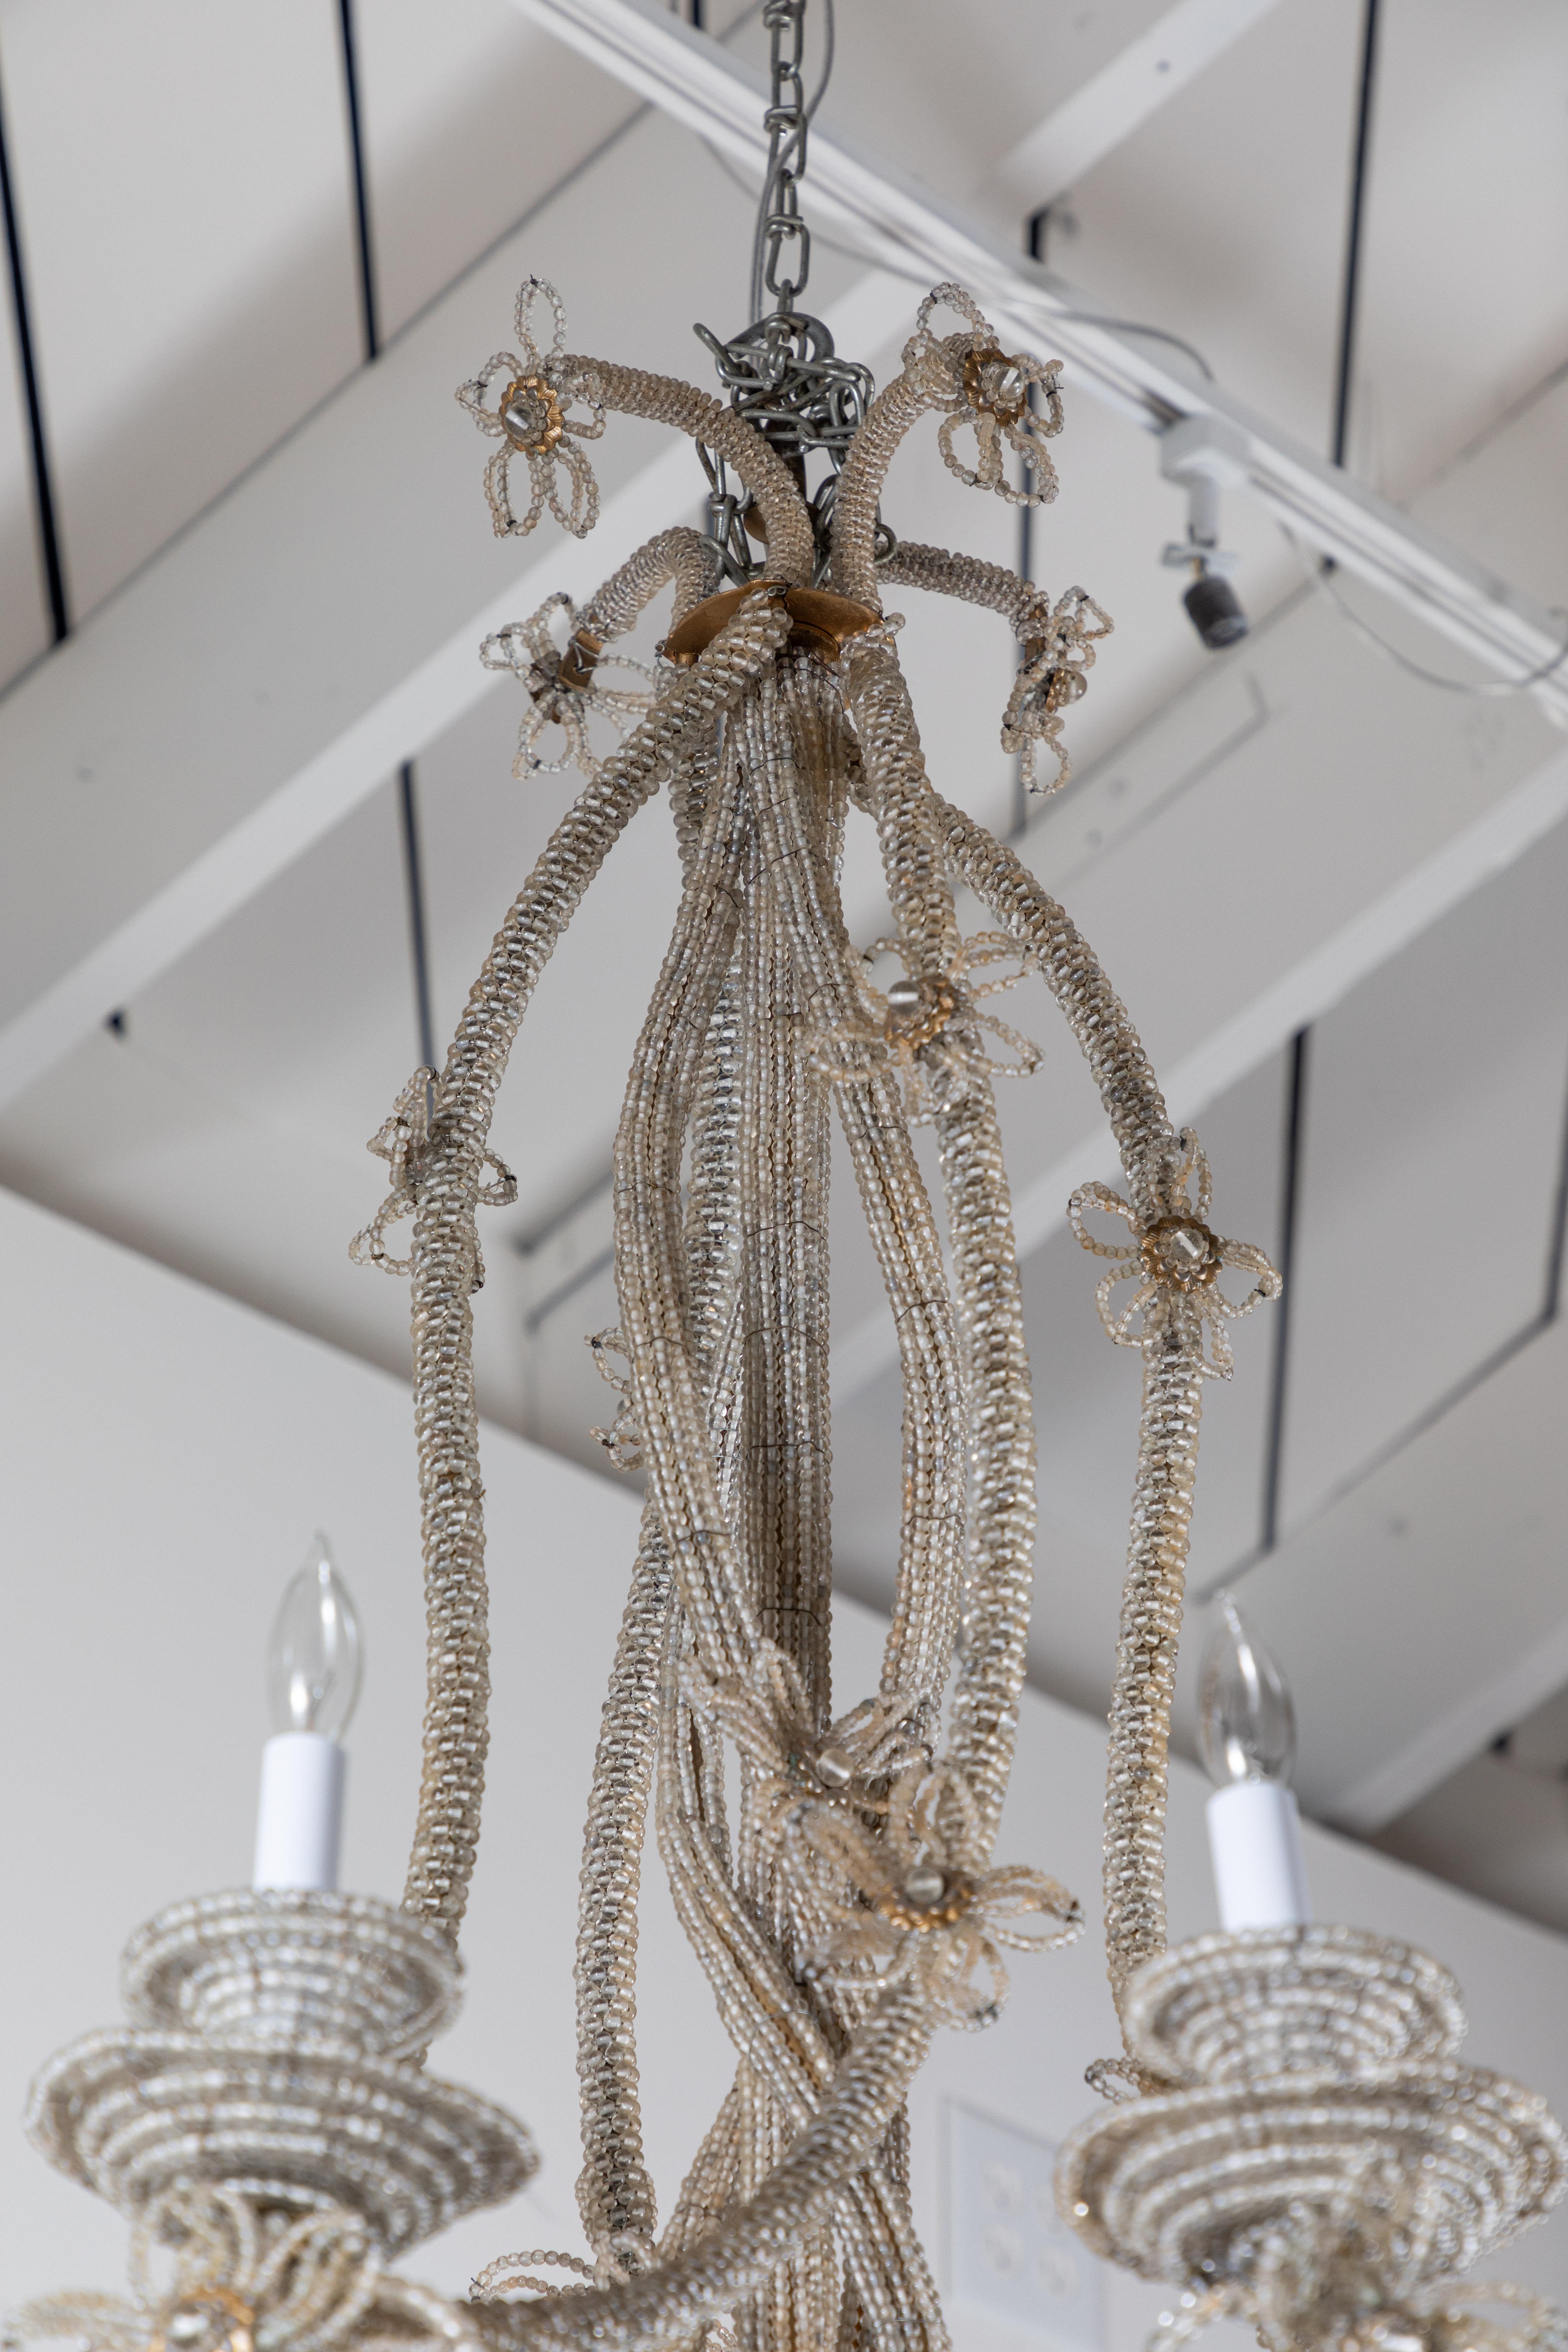 A pair of ravishing, unusual, hand-beaded, chandeliers with wonderful, twisting central column radiating to eight arms. The whole embellished by open leaf forms, flowers, and two-tiered bobeche.